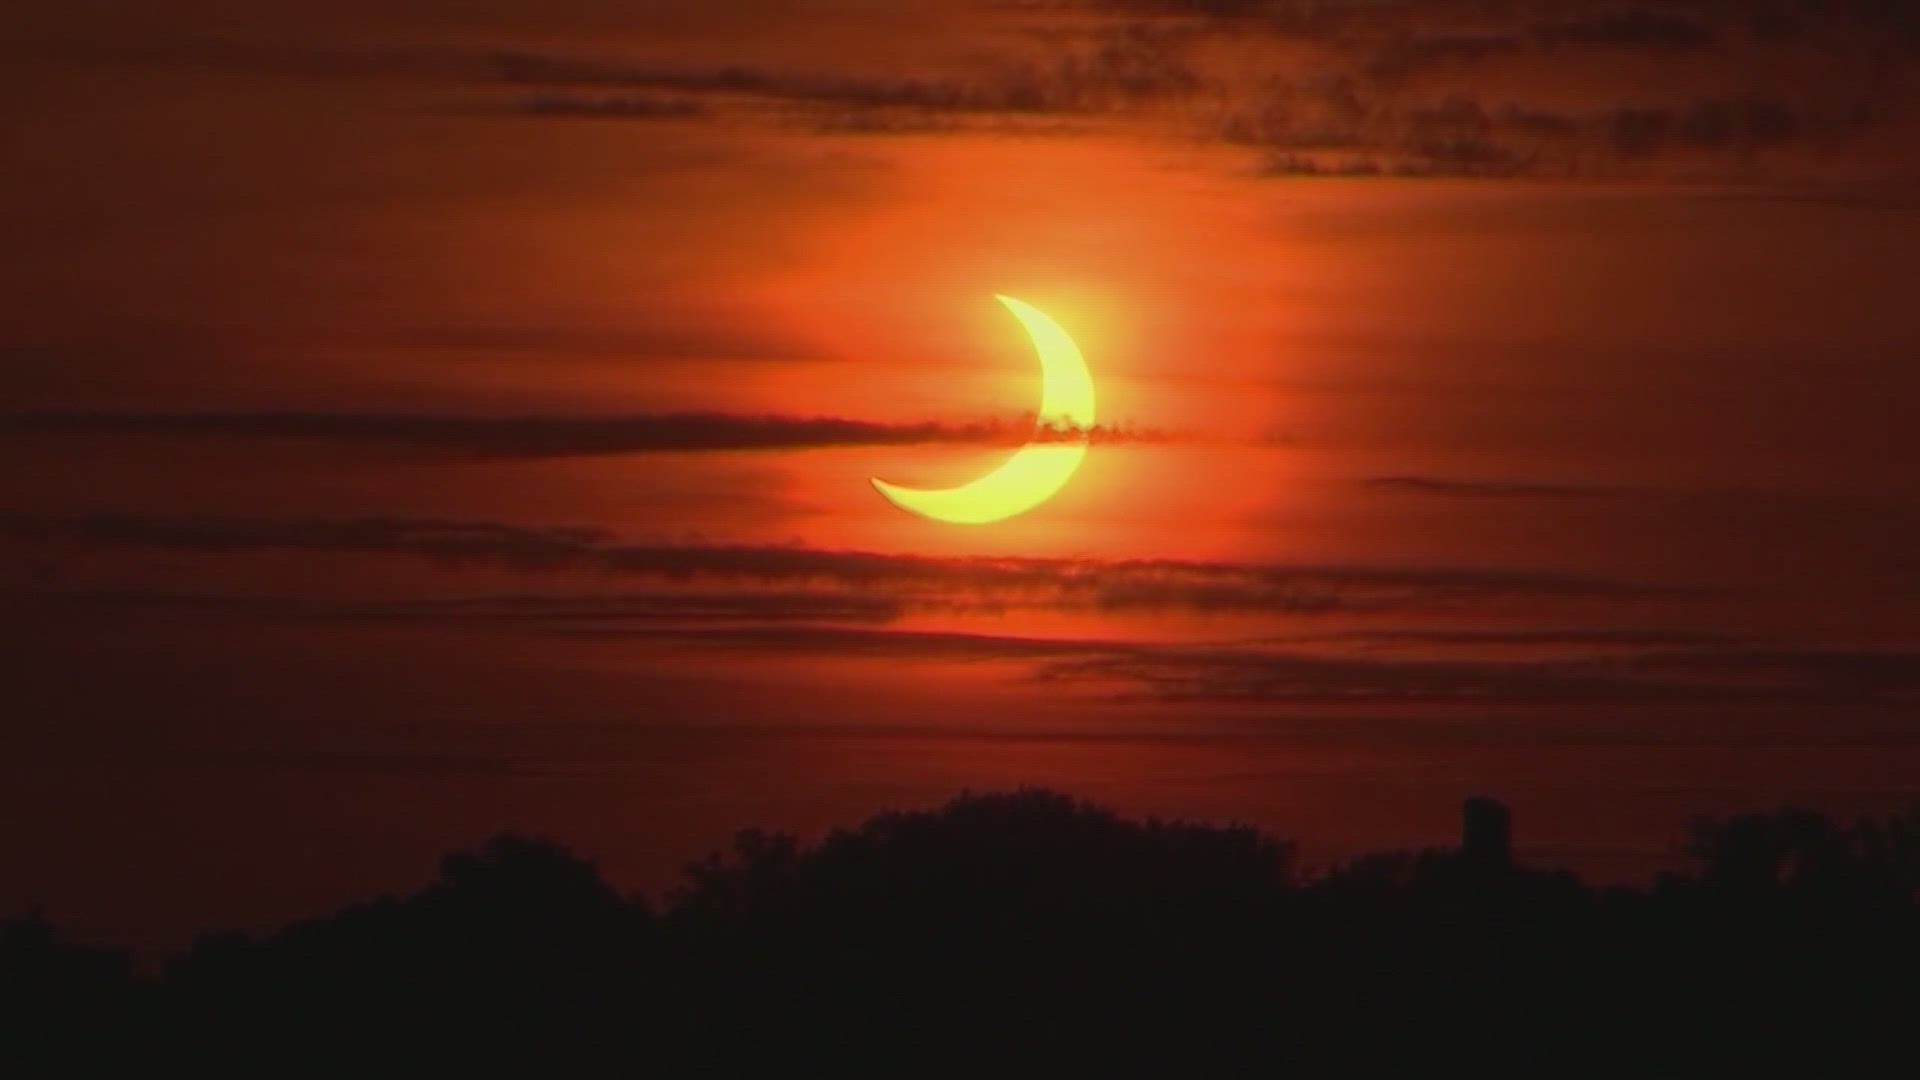 Experts predict at least one million tourists could travel to Texas for the April 8th total eclipse.